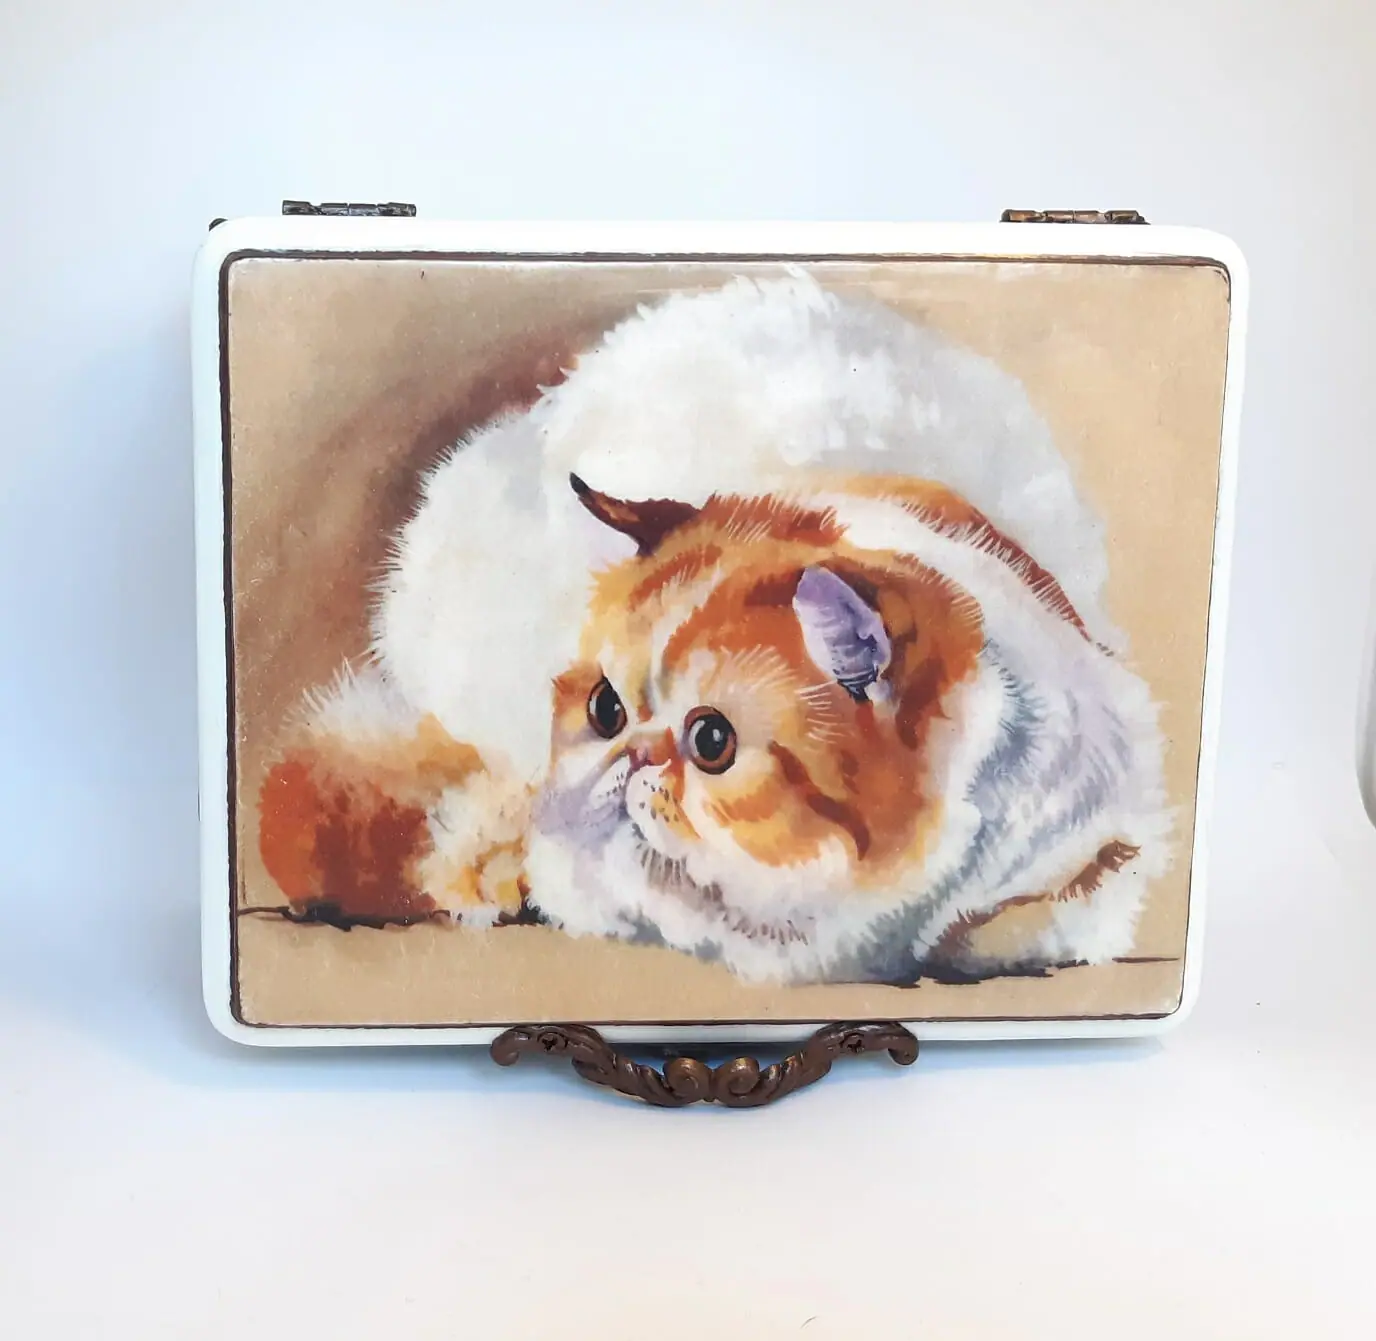 Beautiful brown jewelry box . a small box for small things . Handmade decor . Fluffy white-red cat on the lid of the box. Beautiful chocolate color with white polka dots .